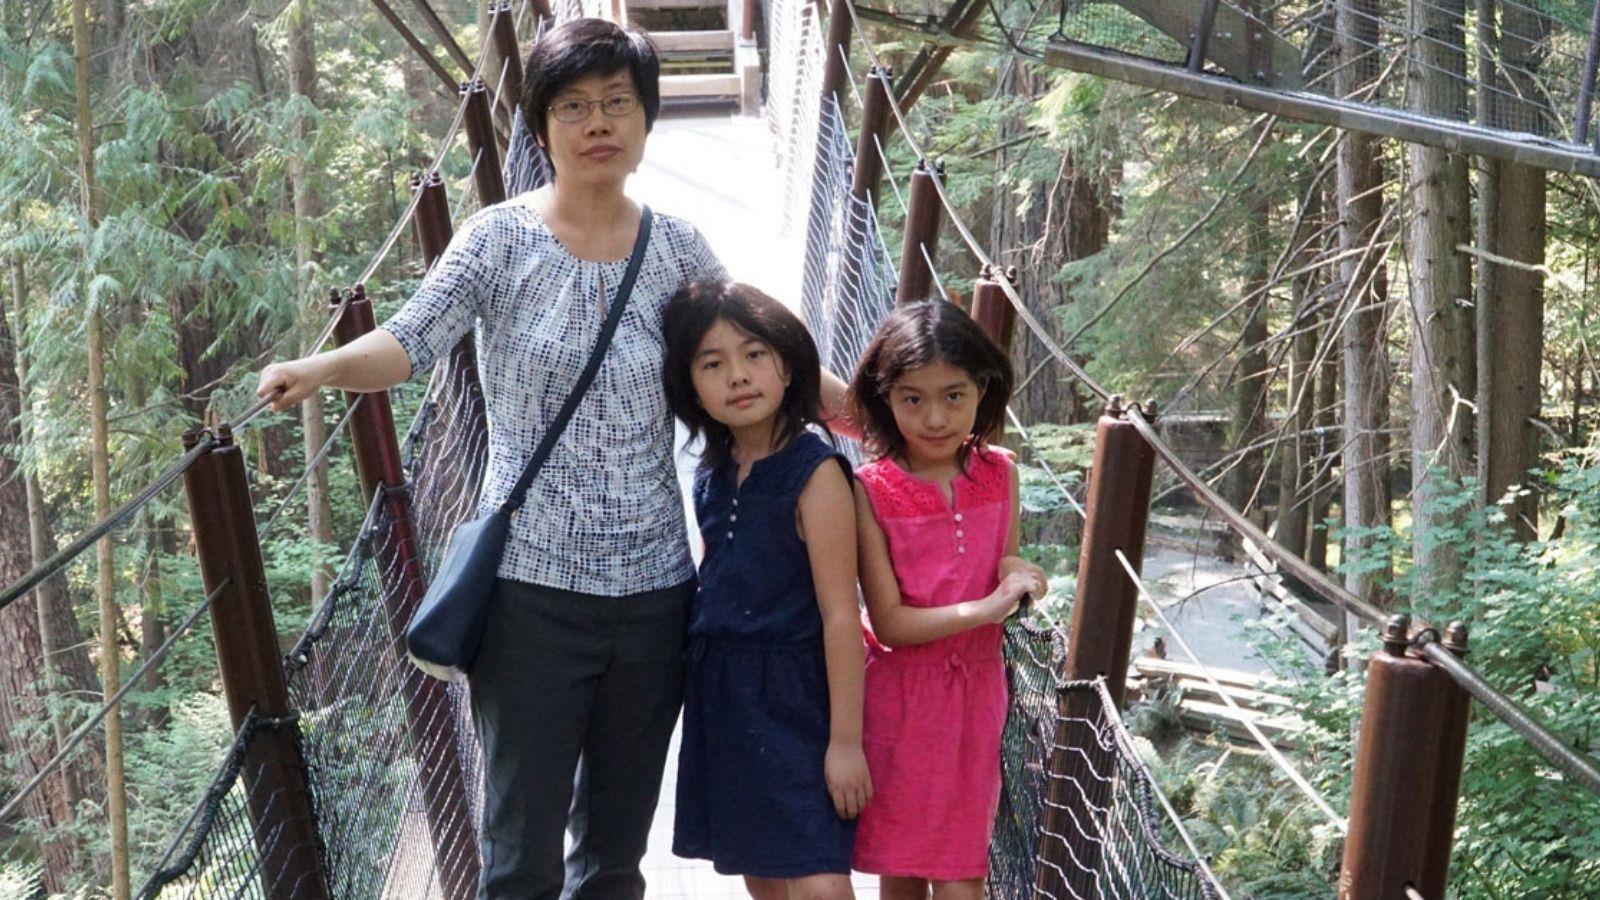 Yingxia Wen, Seqirus Head of Drug Discovery Research, with her daughters.